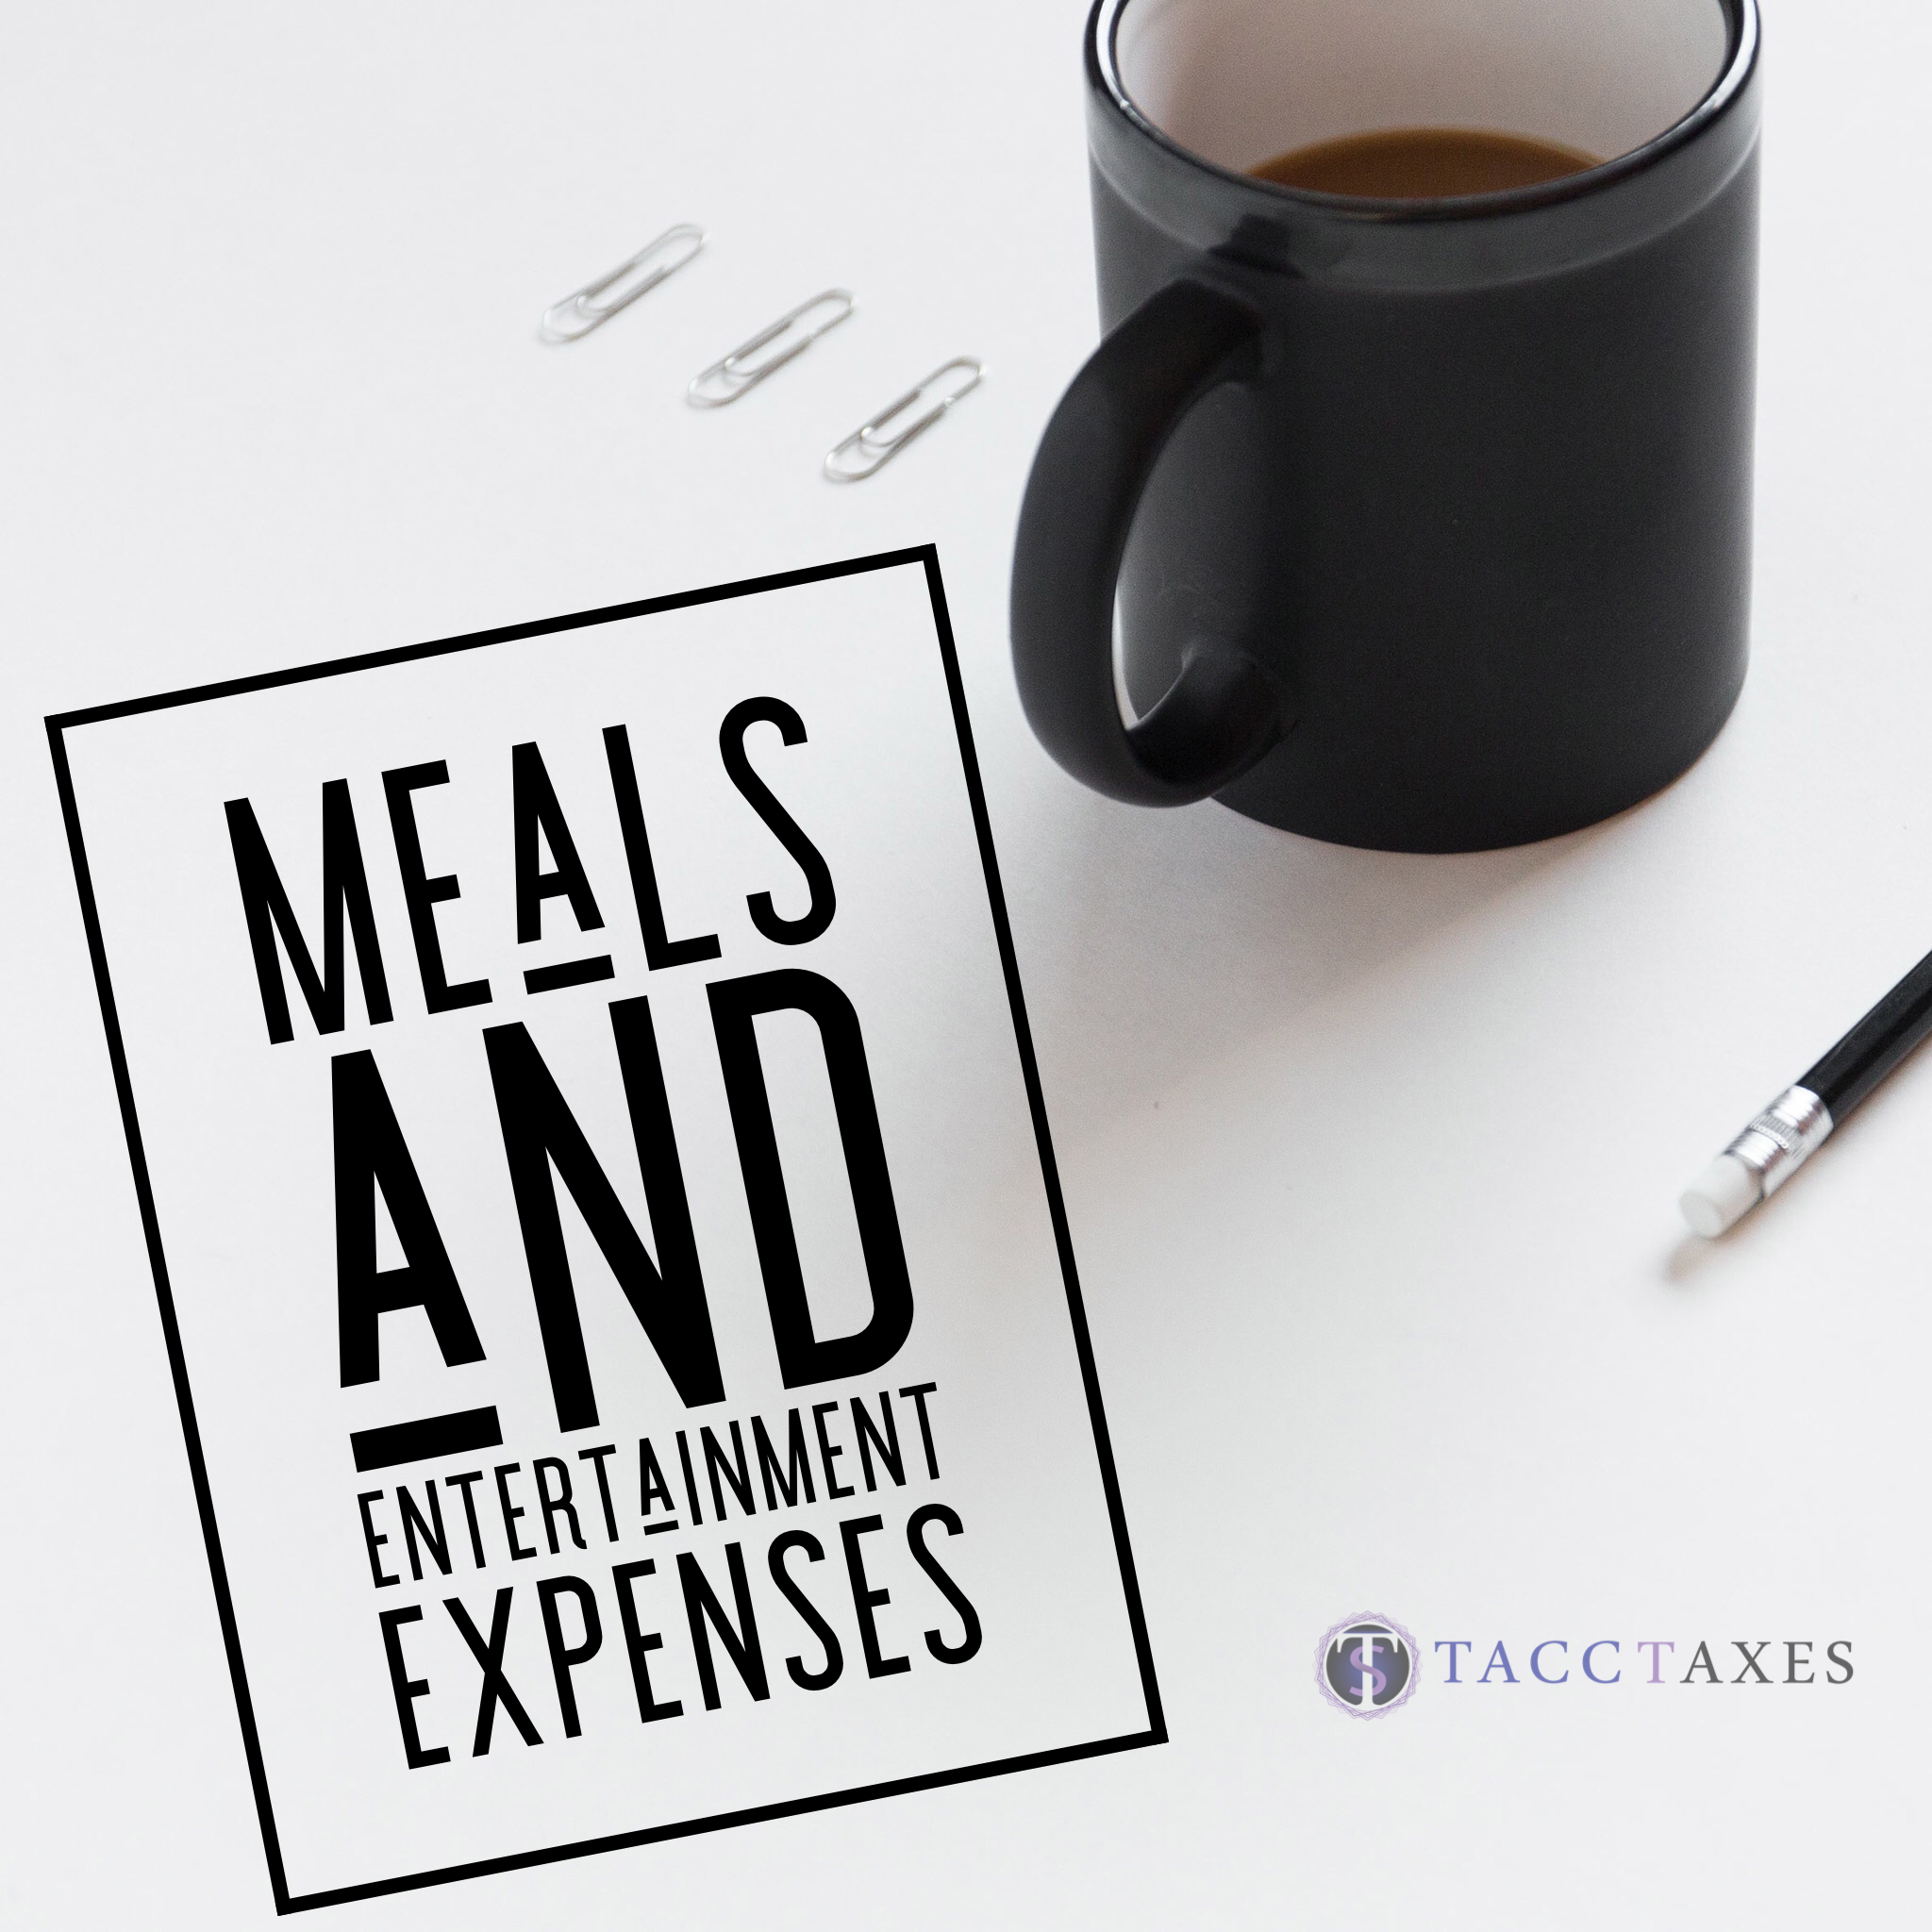 Meals and Entertainment Expenses per TCJA Tax Reform